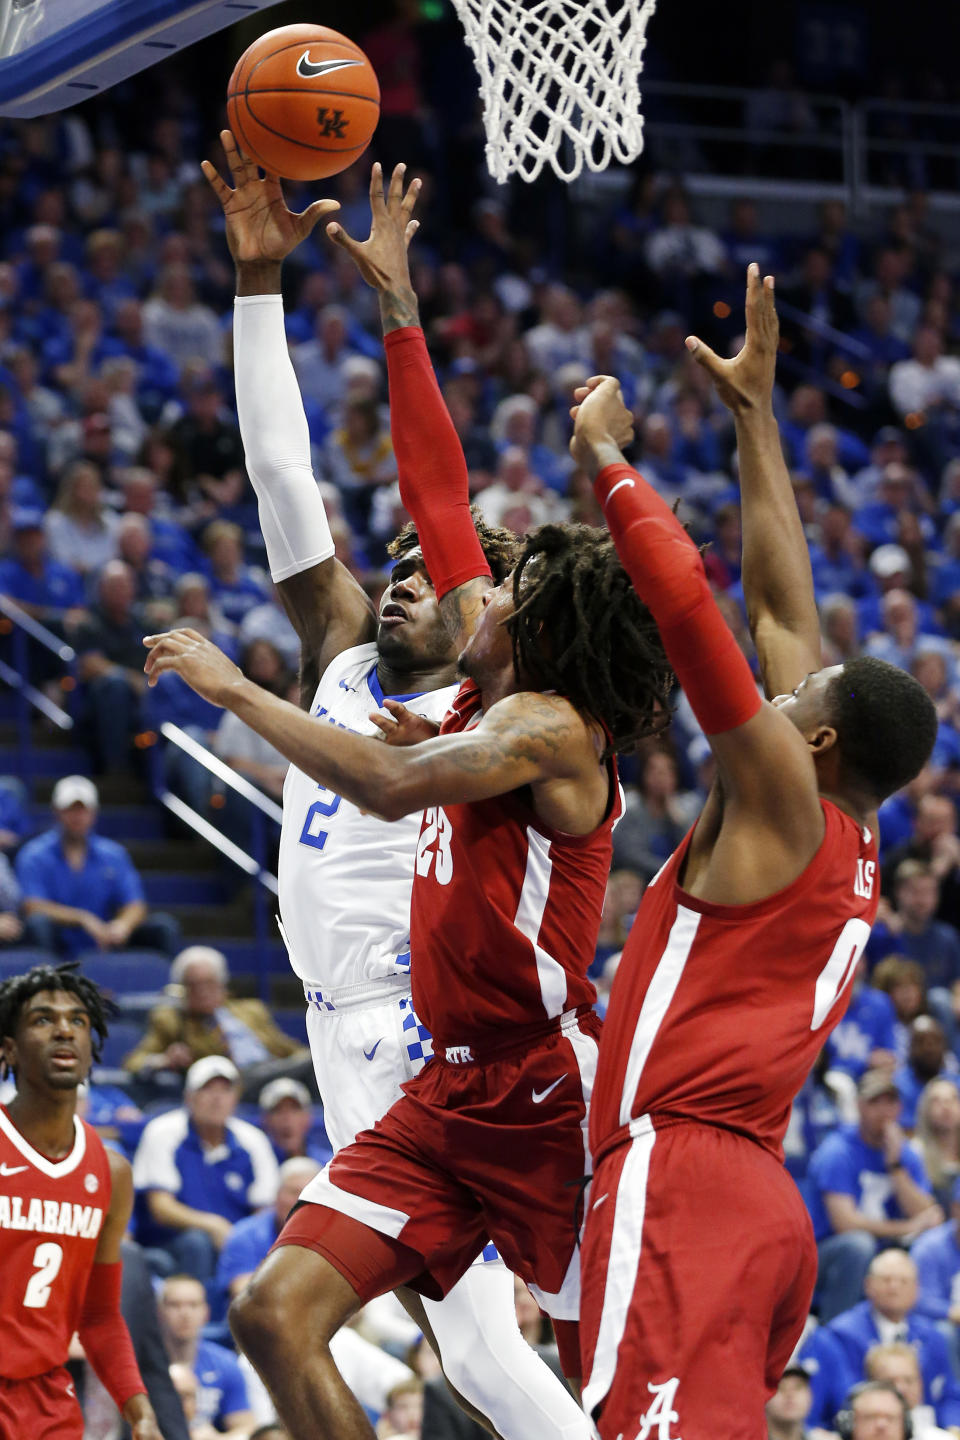 Kentucky's Kahlil Whitney, left, shoots while pressured by Alabama's John Petty Jr. and Javian Davis, right, during the first half of an NCAA college basketball game in Lexington, Ky., Saturday, Jan 11, 2020. (AP Photo/James Crisp)